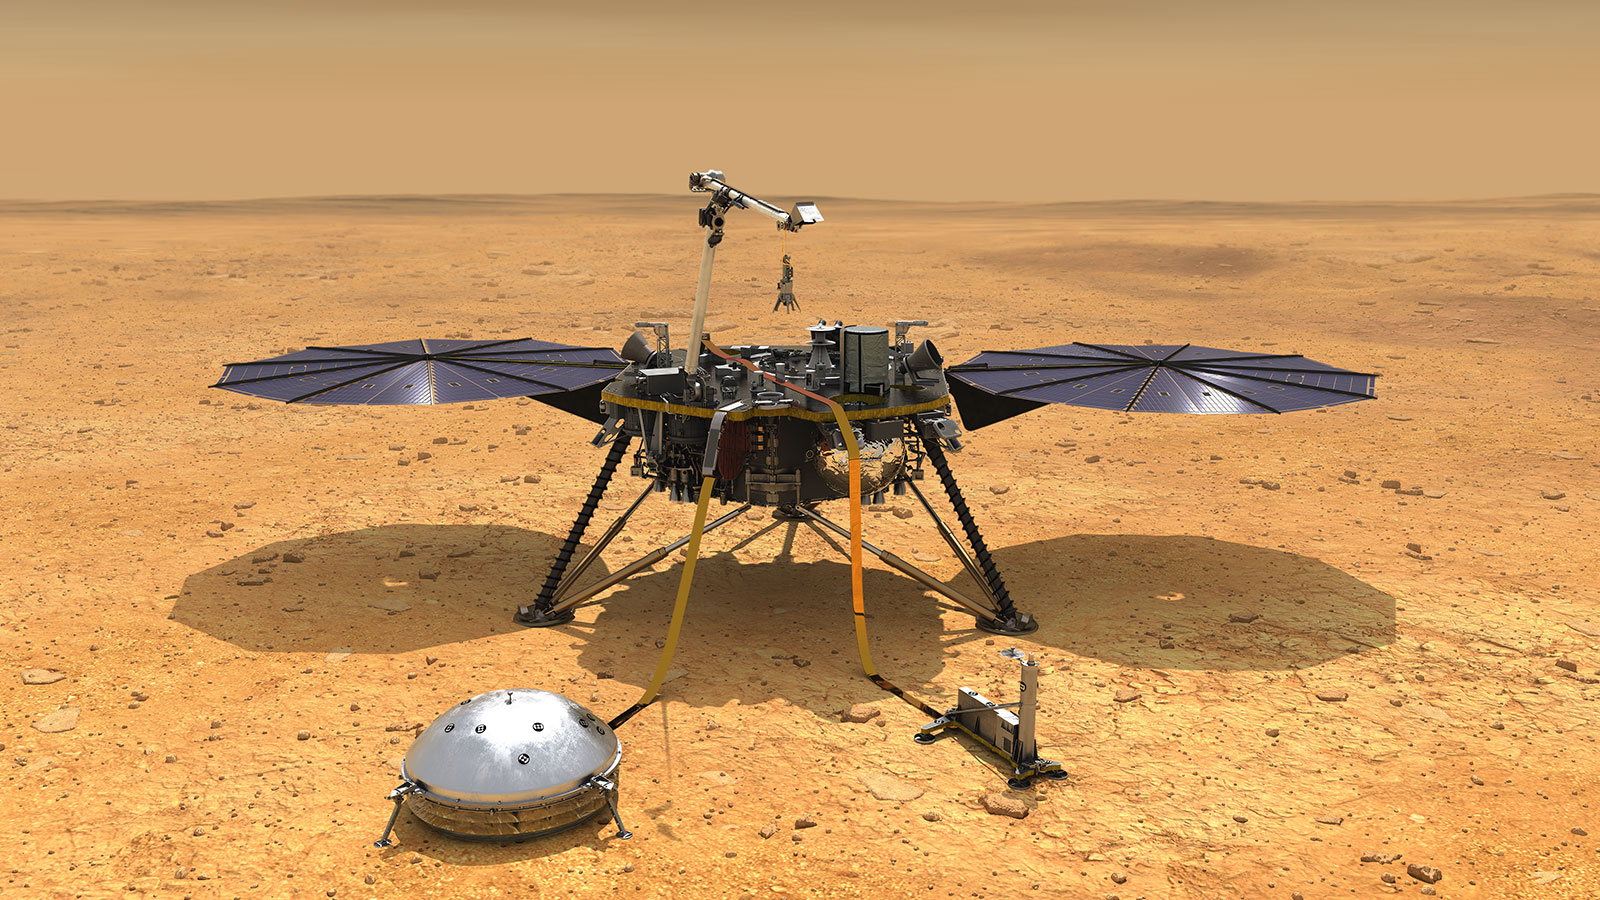 A spacecraft with two solar wings is seen on an arid, orange and brown ground.